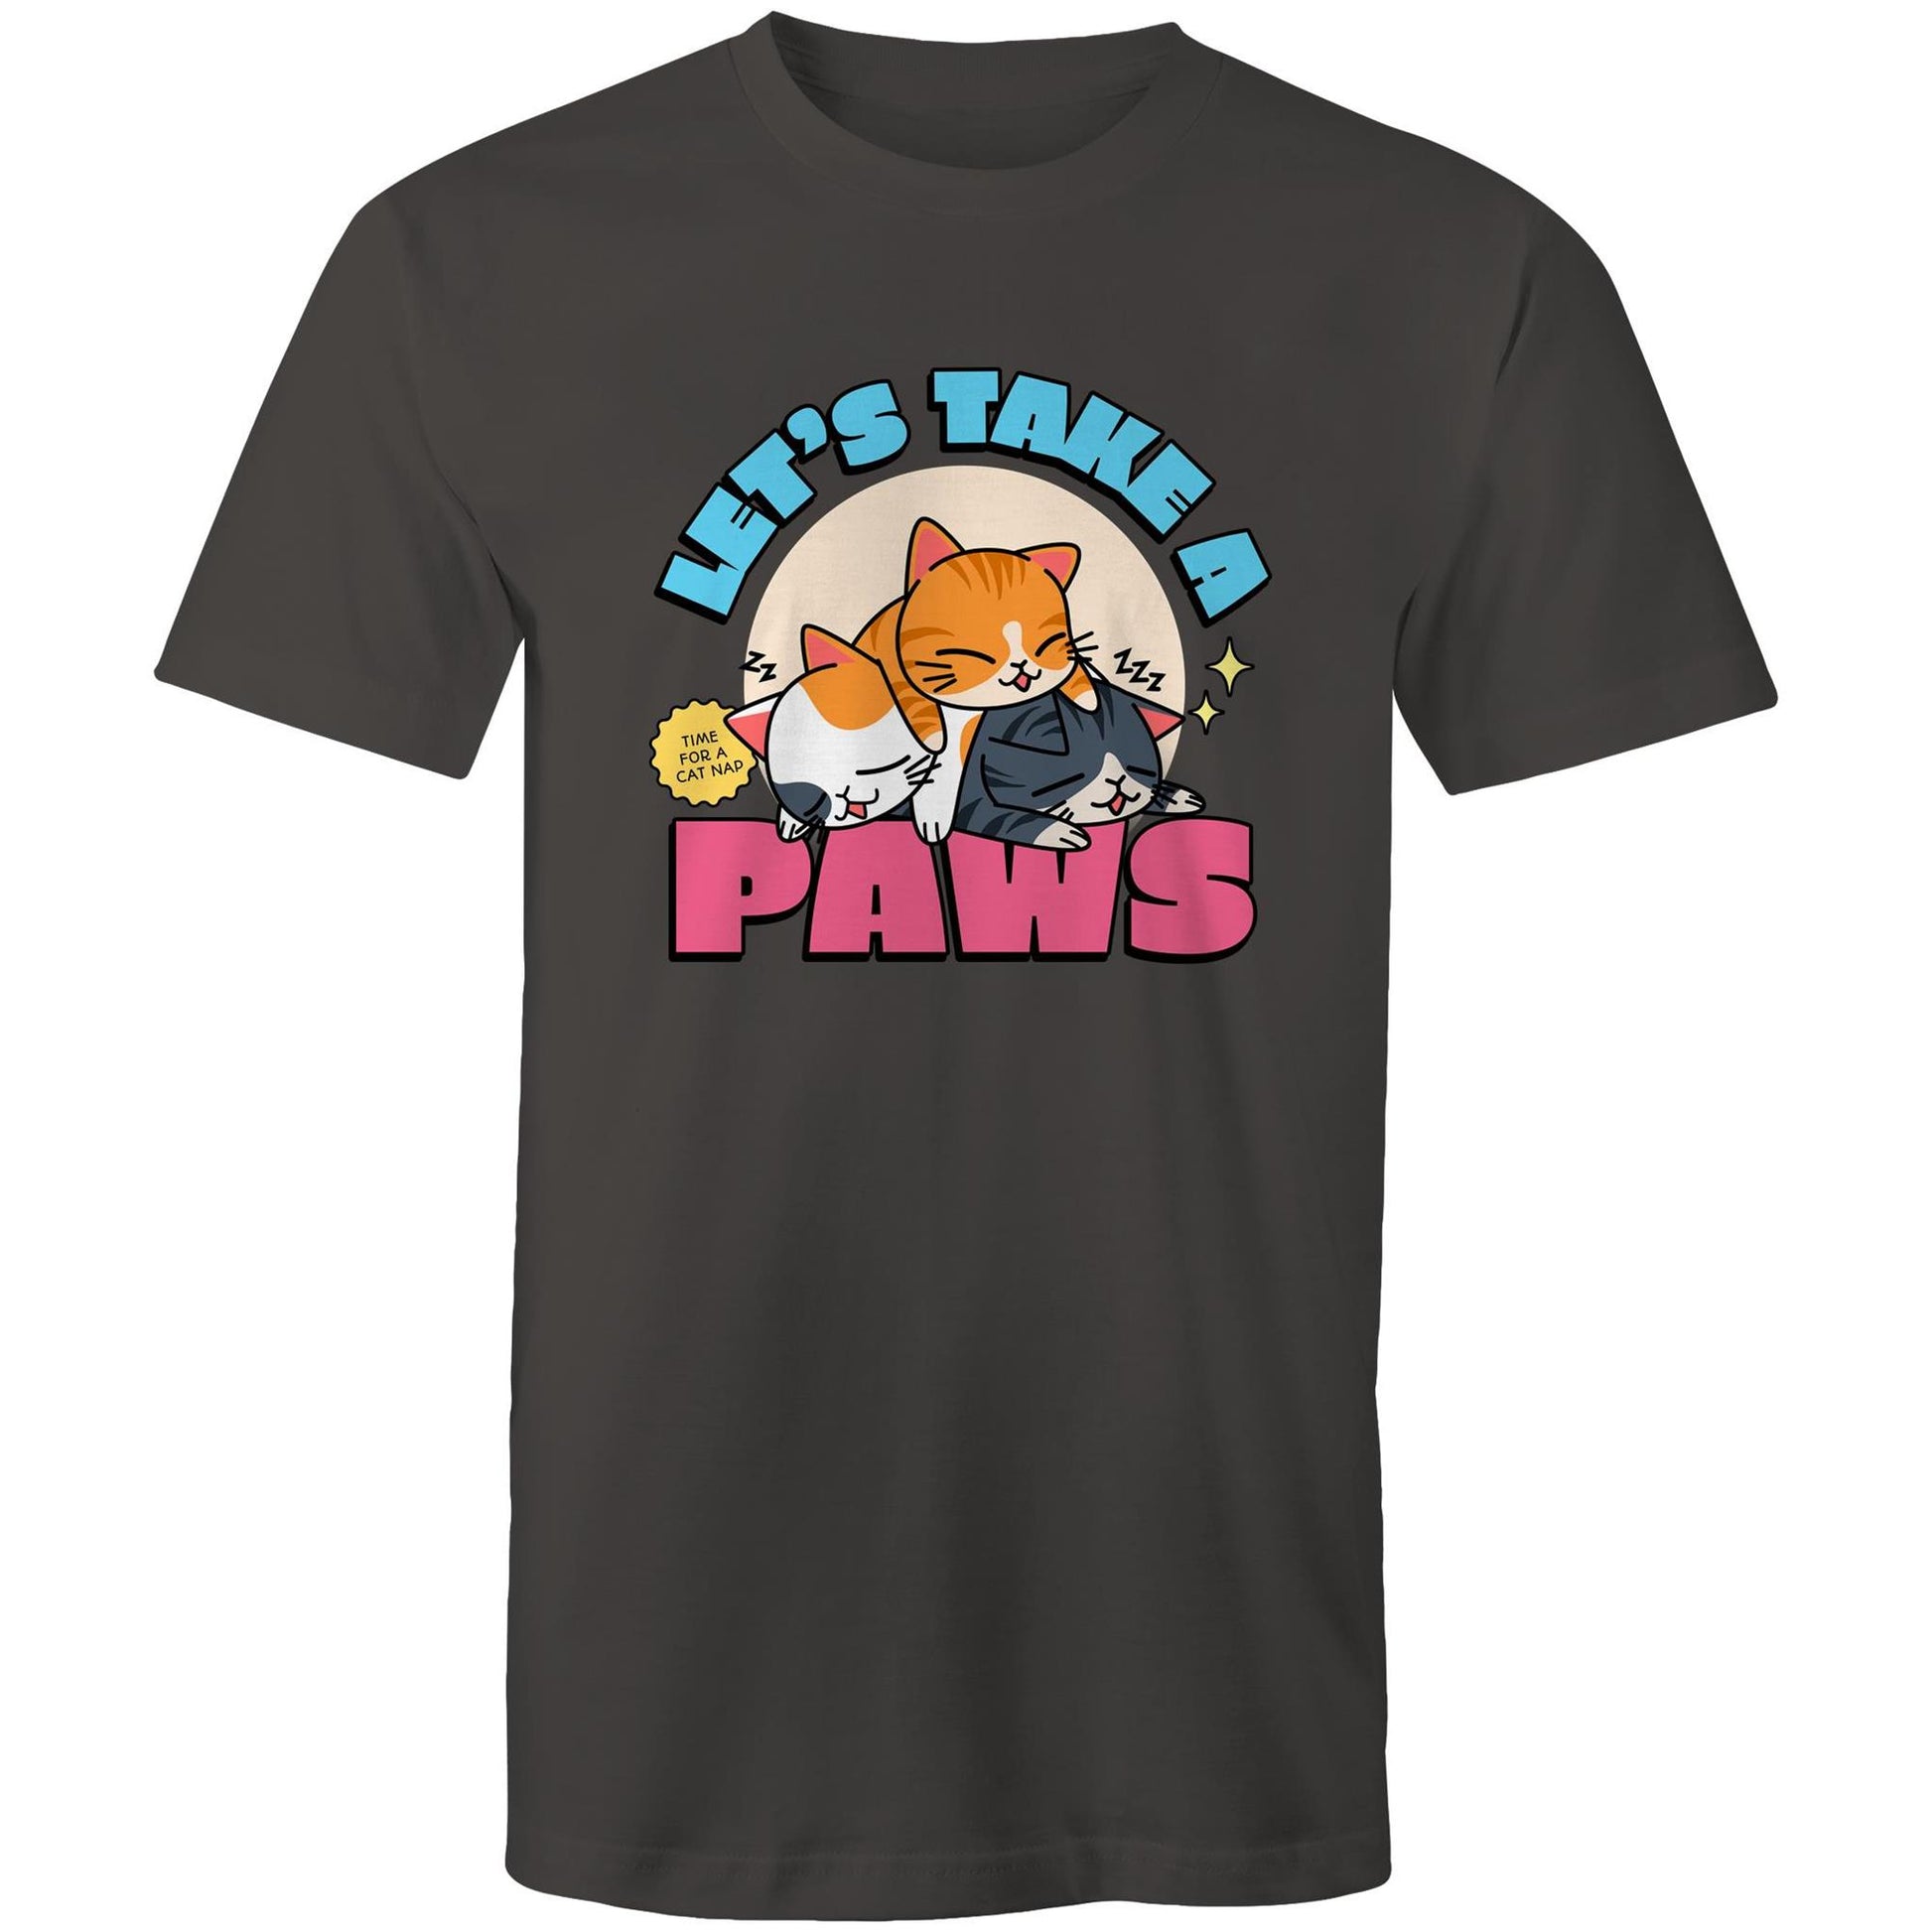 Let's Take A Paws, Time For A Cat Nap - Mens T-Shirt Charcoal Mens T-shirt animal